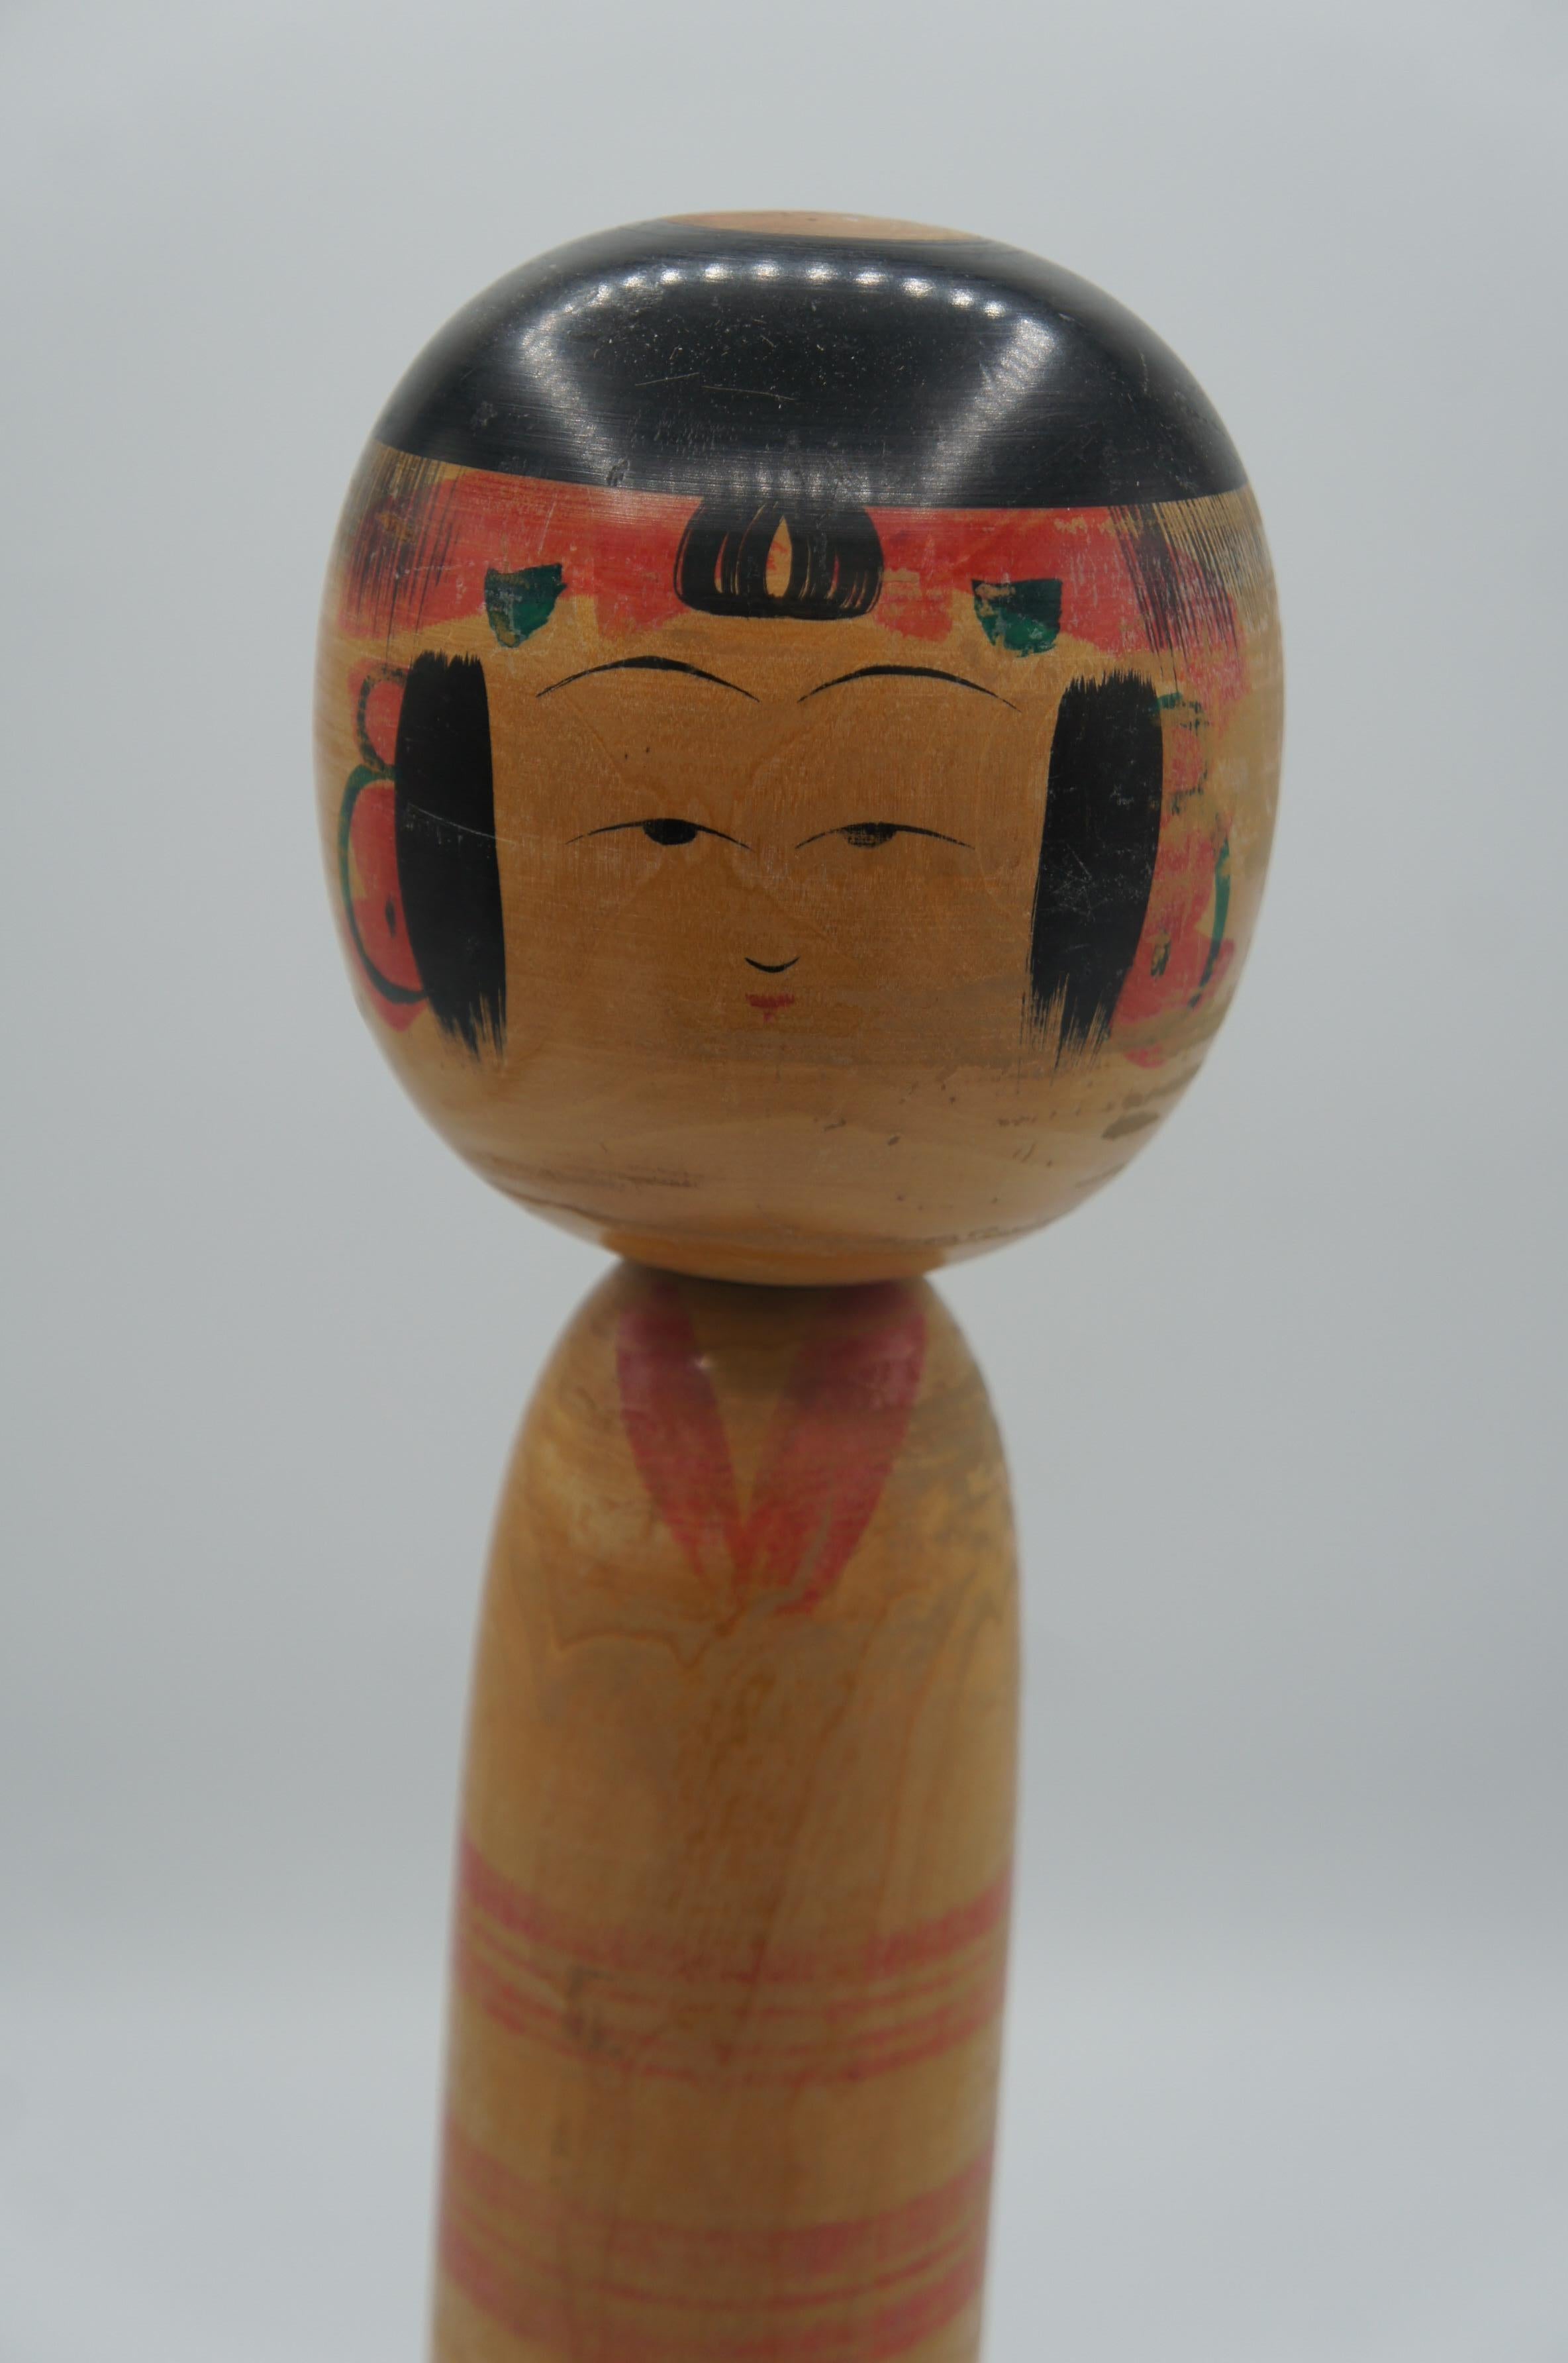 This wooden doll is called Kokeshi in Japanese. 
This kokeshi was made by a kokeshi artist Sakyo NIIYAMA. He was born in 1934, 18th March.
 It is made with Yajiro style from Miyagi prefecture in Tohoku.

Dimensions: H36 x 10 x 10 cm

Kokeshi are